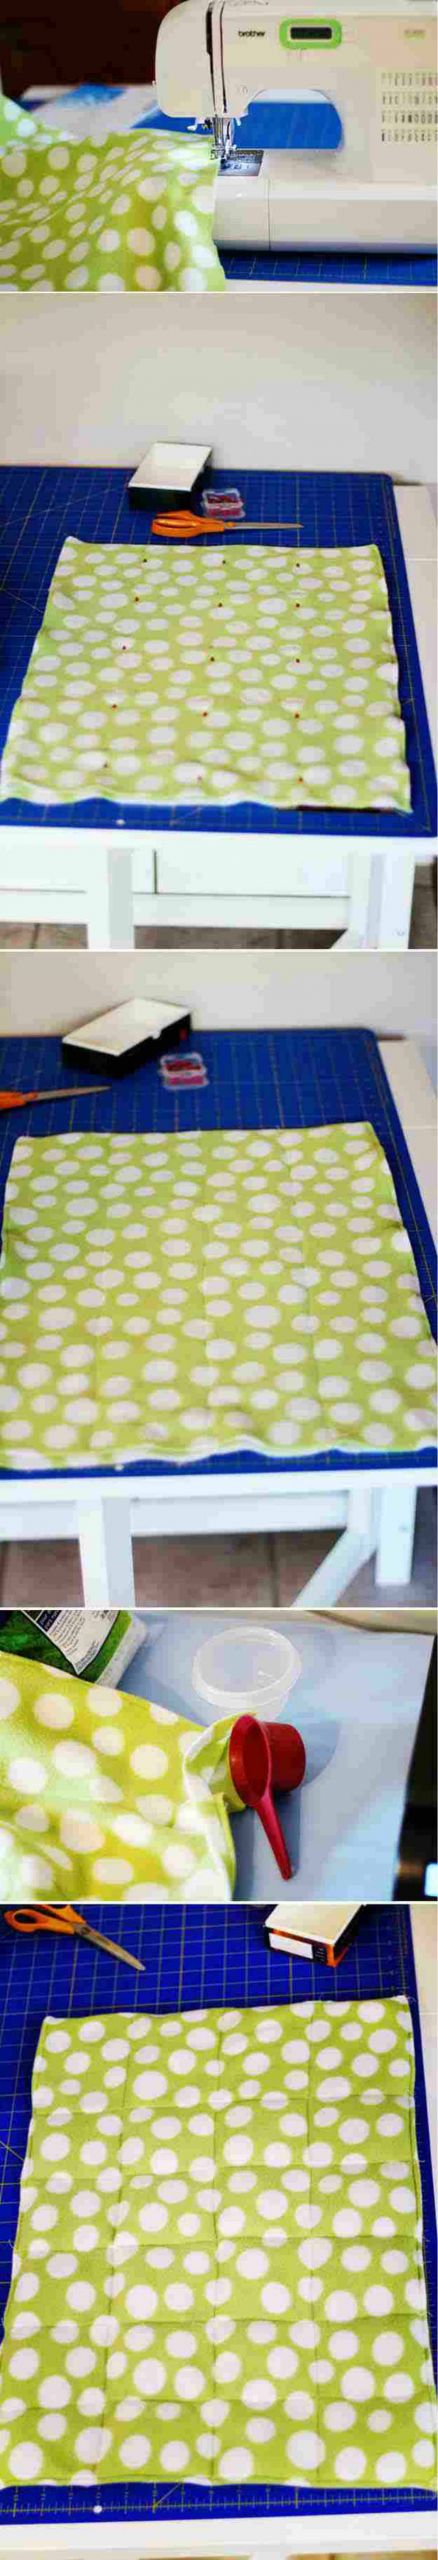 Weighted Blanket For Adults DIY
 Weighted Blankets DIY Ideas And Projects